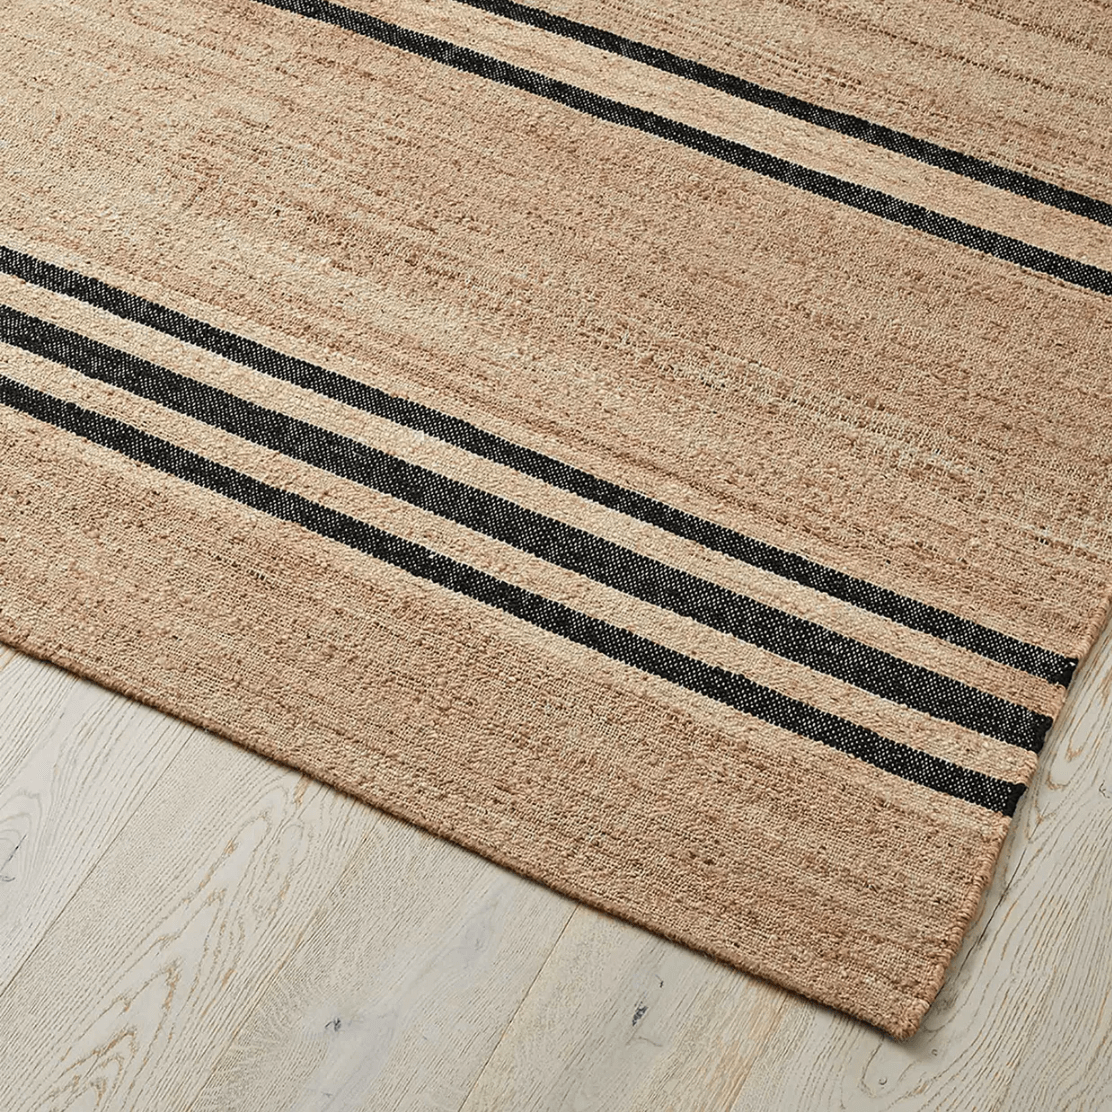 A close up of a natural brown rug with black horizontal stripes.